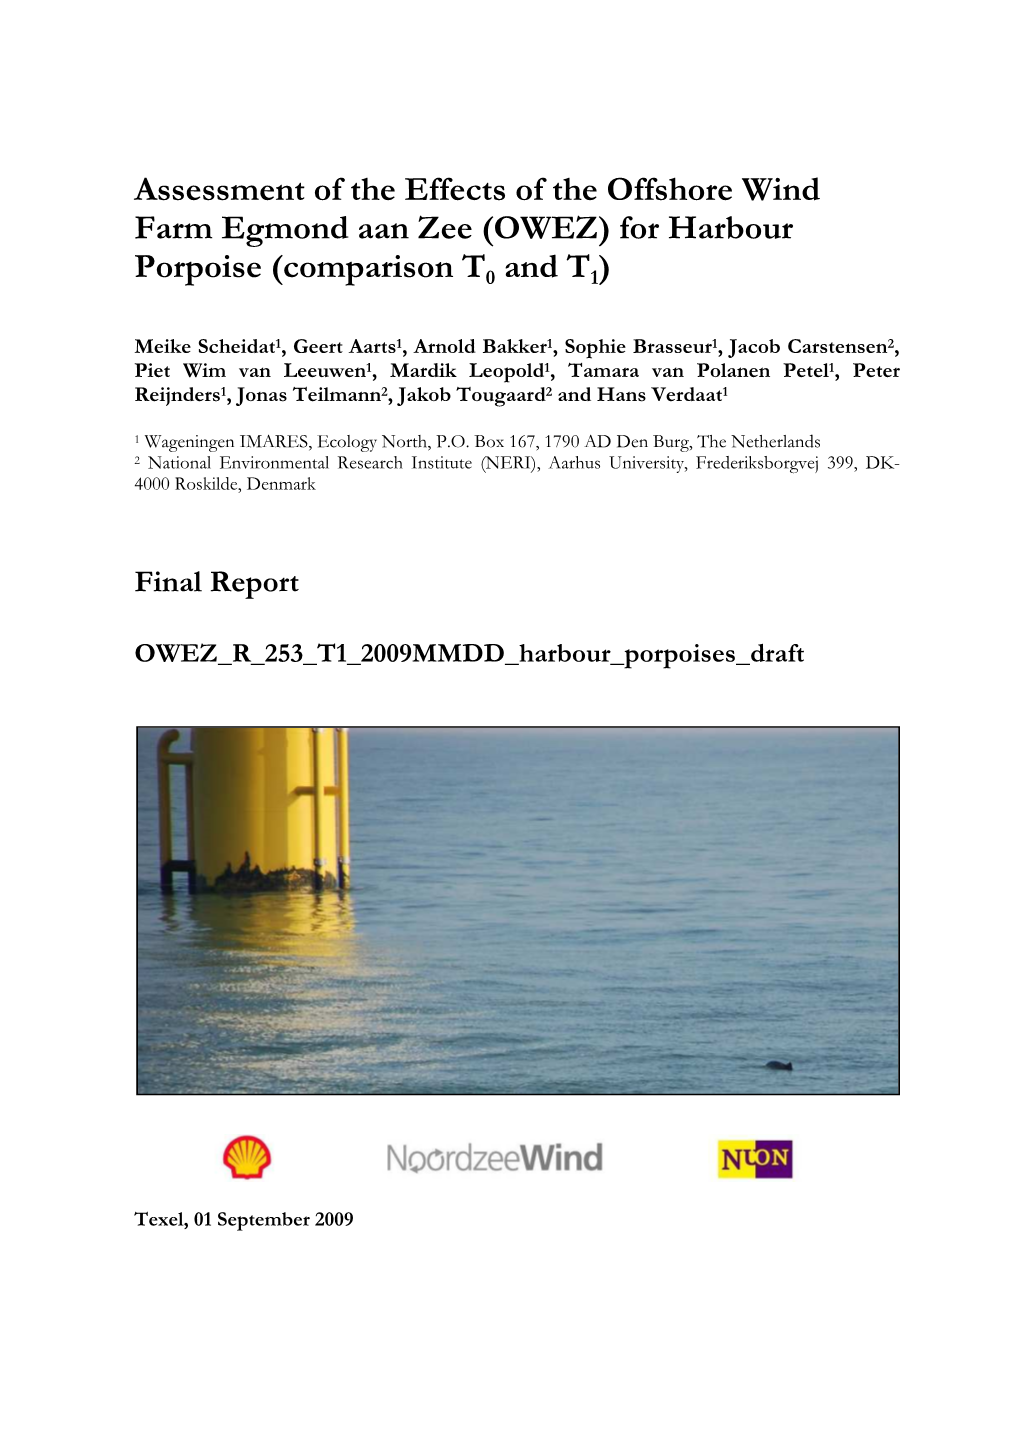 Assessment of the Effects of the Offshore Wind Farm Egmond Aan Zee (OWEZ) for Harbour